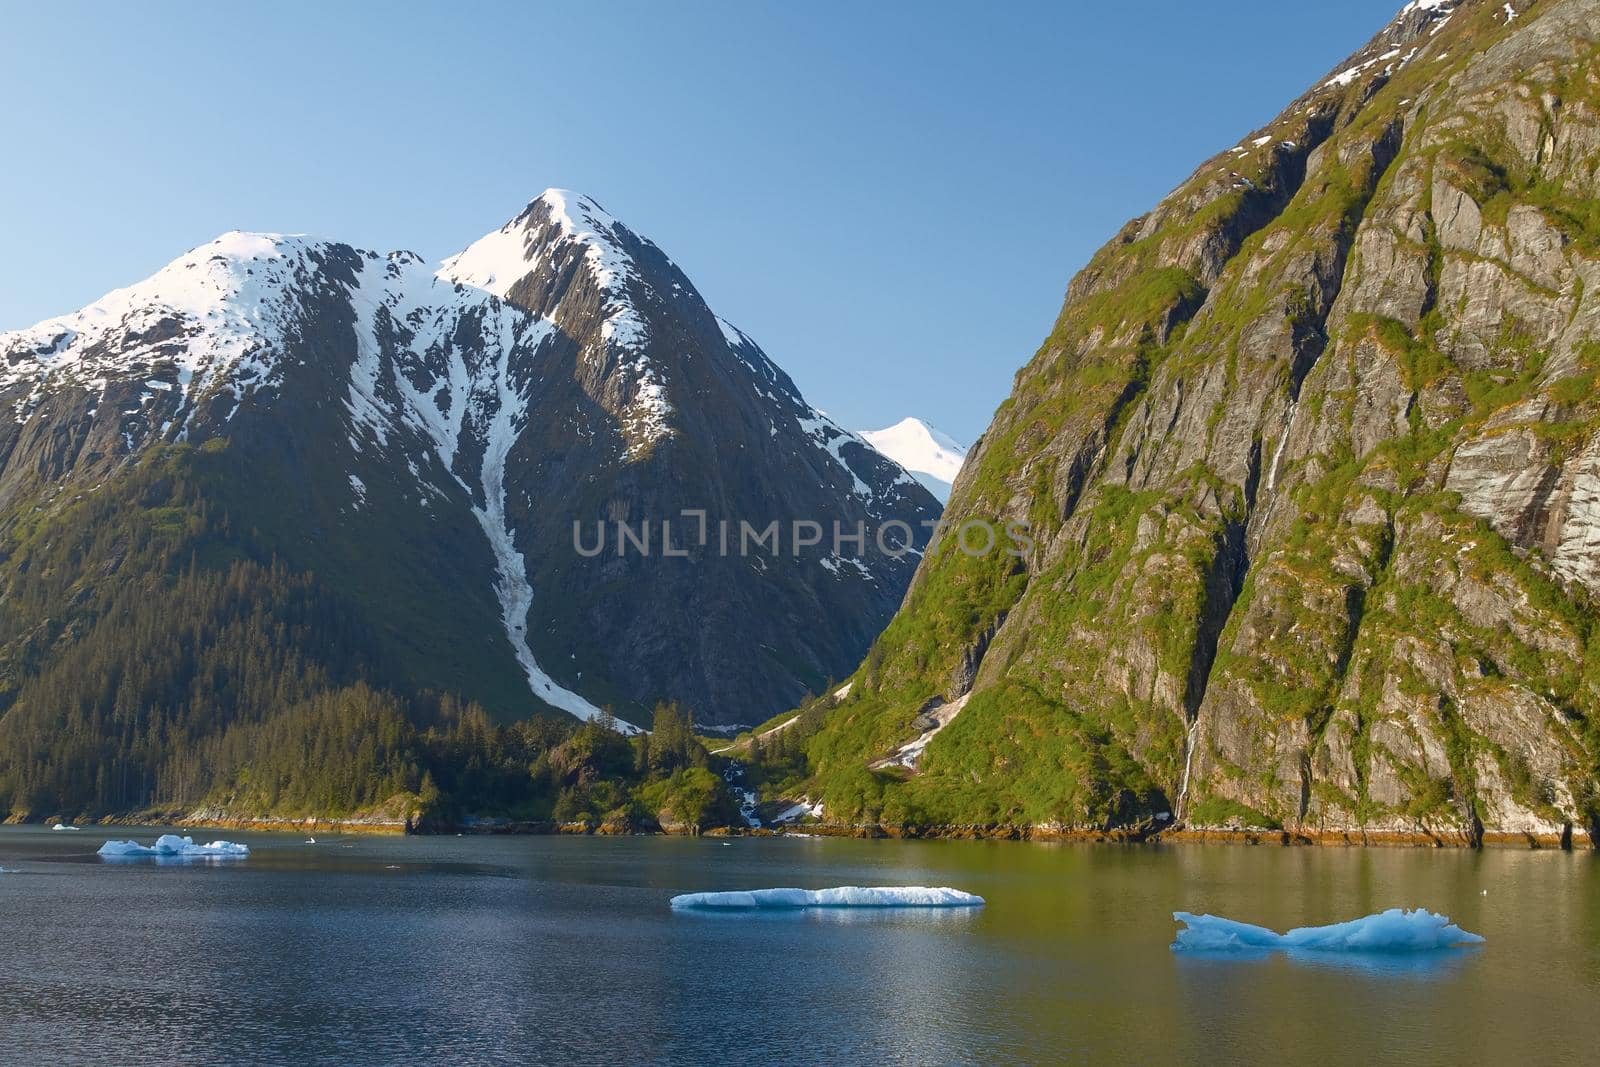 Landscape at Tracy Arm Fjords in Alaska United States by wondry